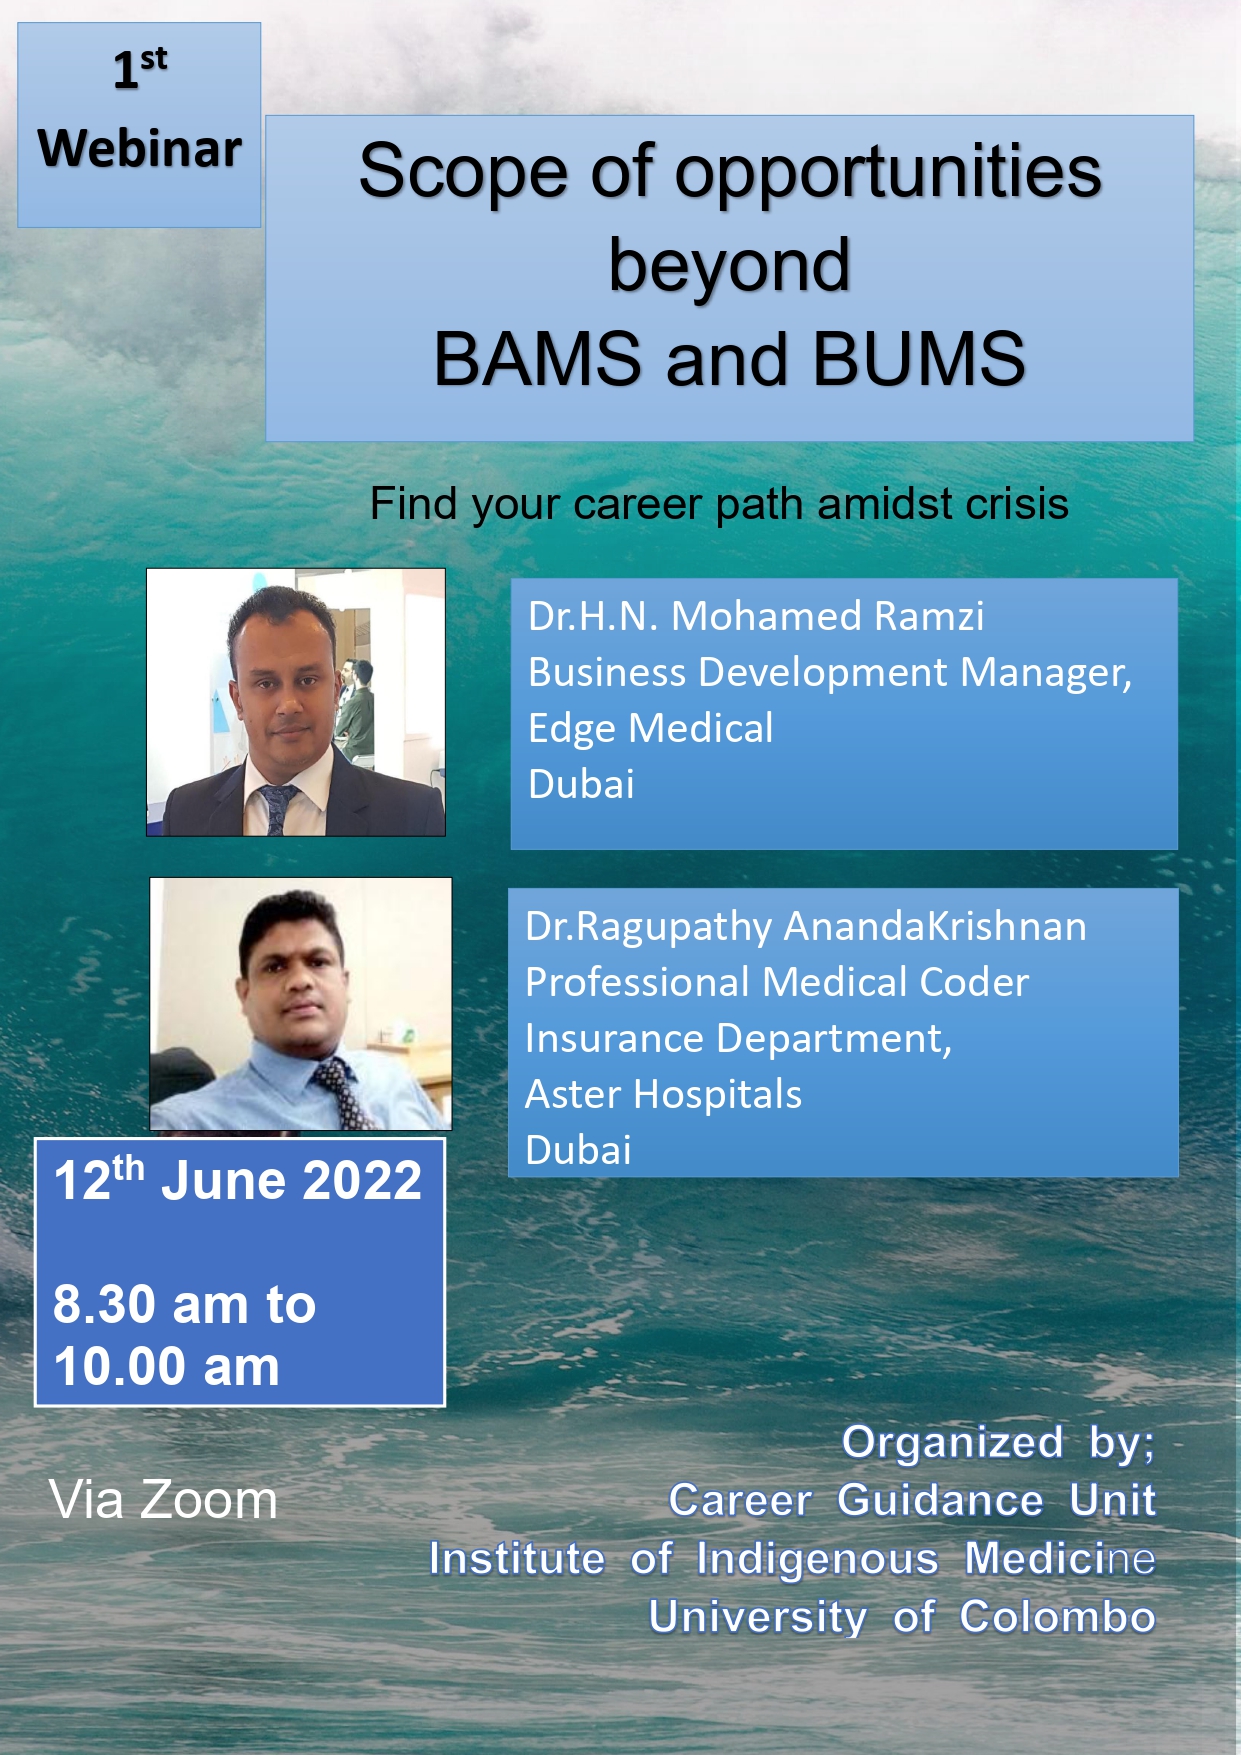 Scope of Opportunities beyond BAMS and BUMS